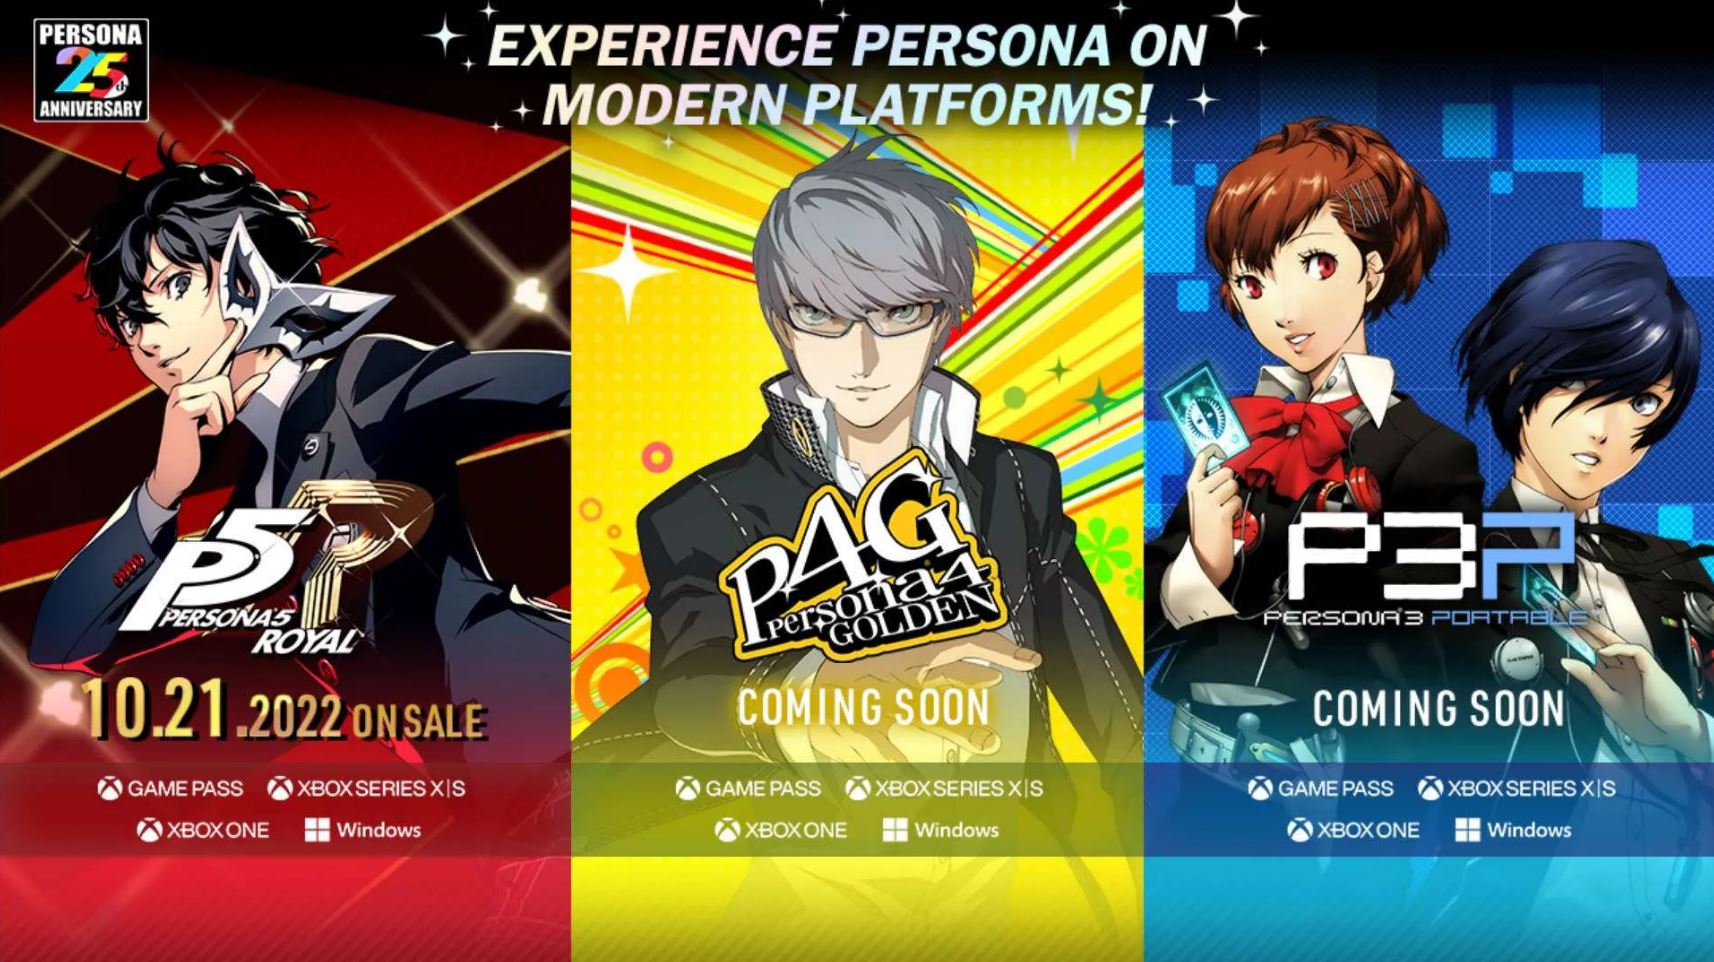 Persona was revealed for modern platforms during its 25th anniversary. Atlus might follow a similar pattern for Shin Megami Tensei